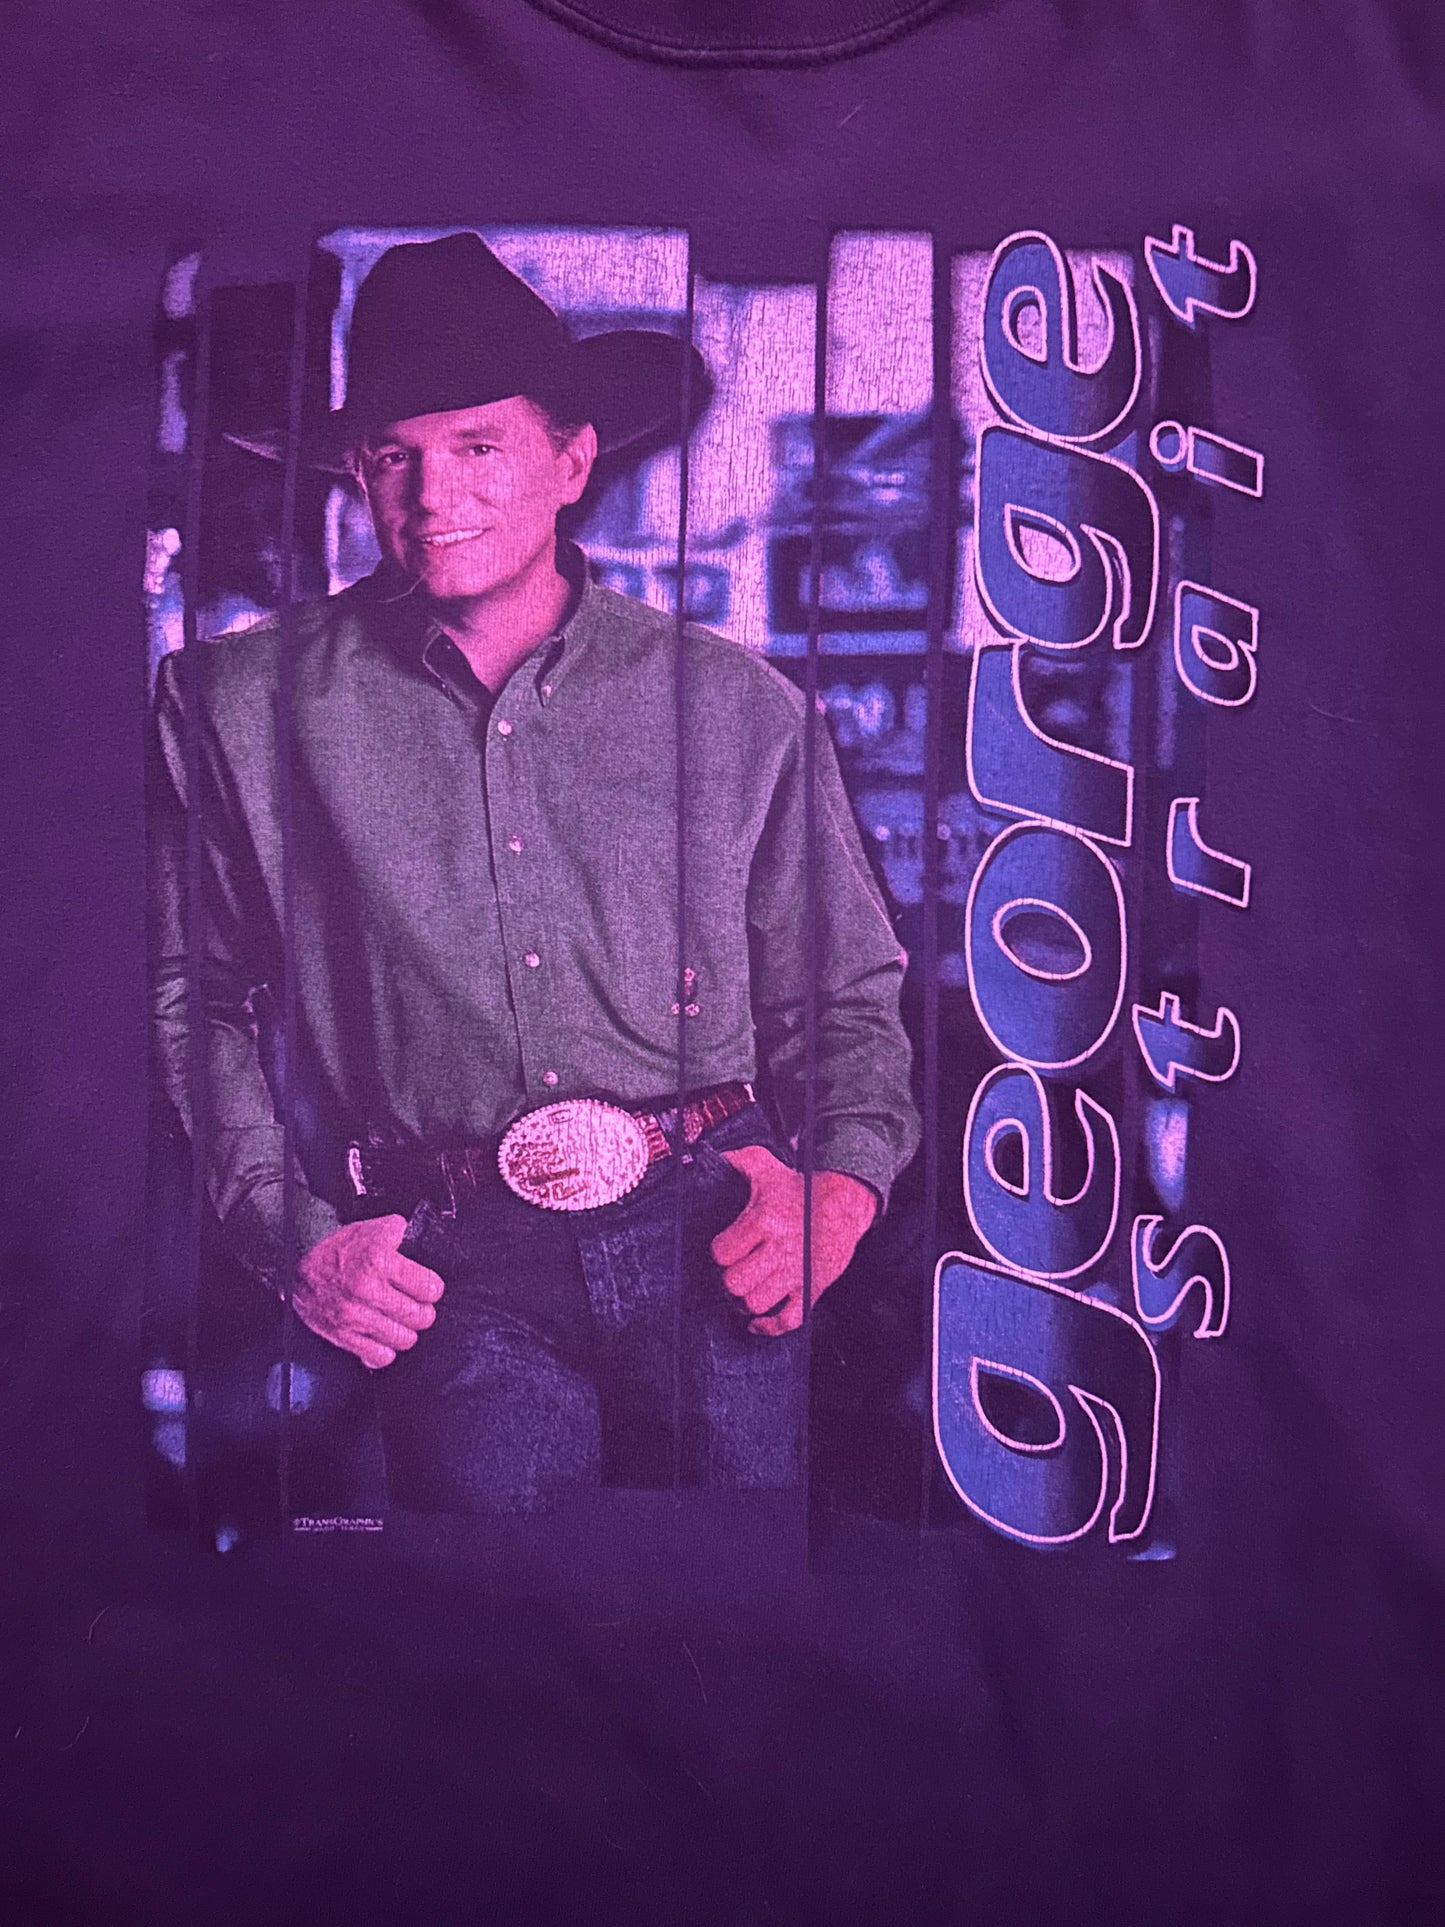 Y2K George Strait Country Music Festival Tee Size - L